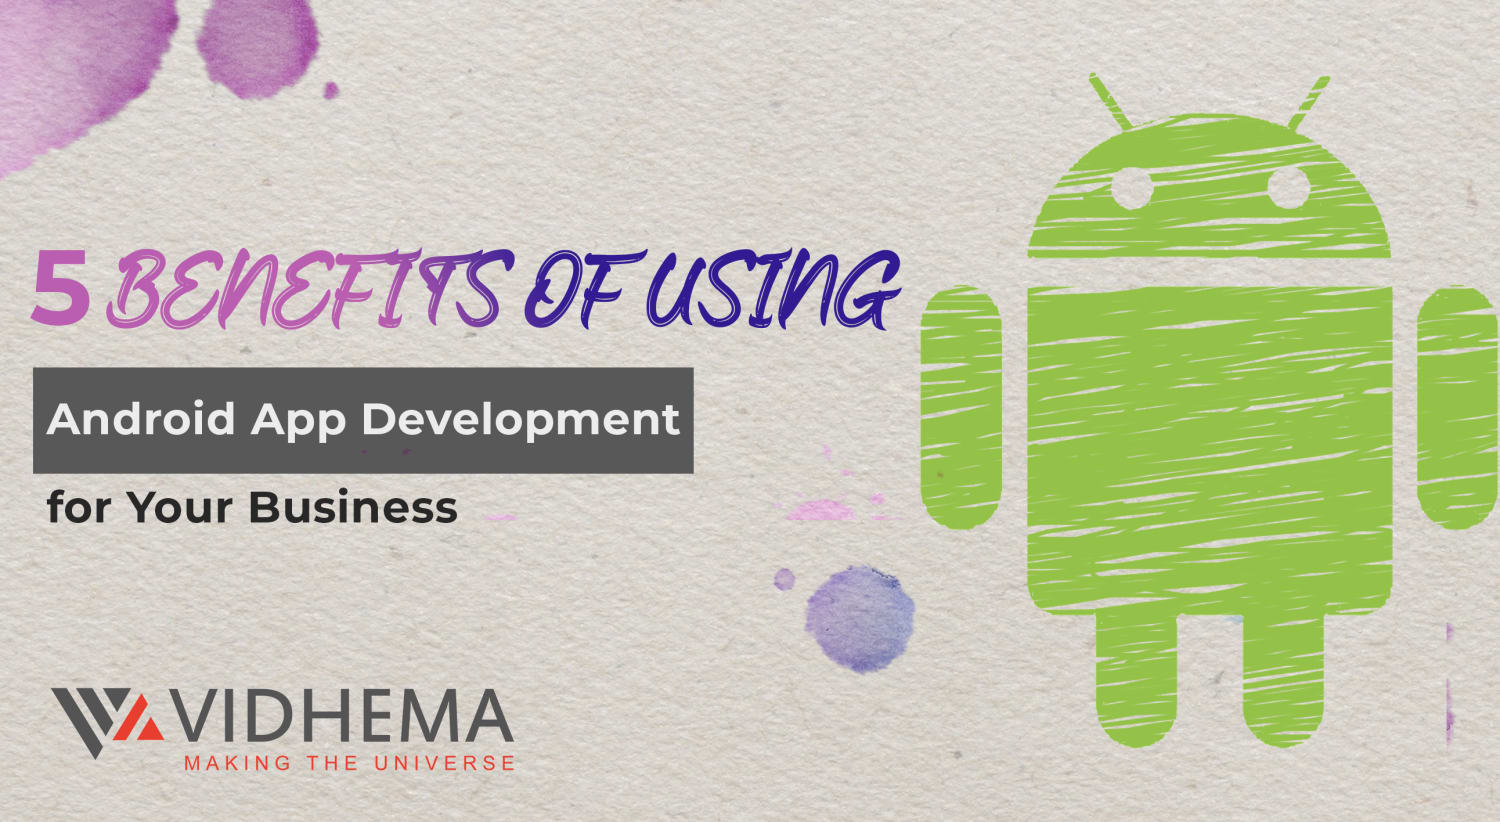 5 Benefits of Using Android App Development for Your Business